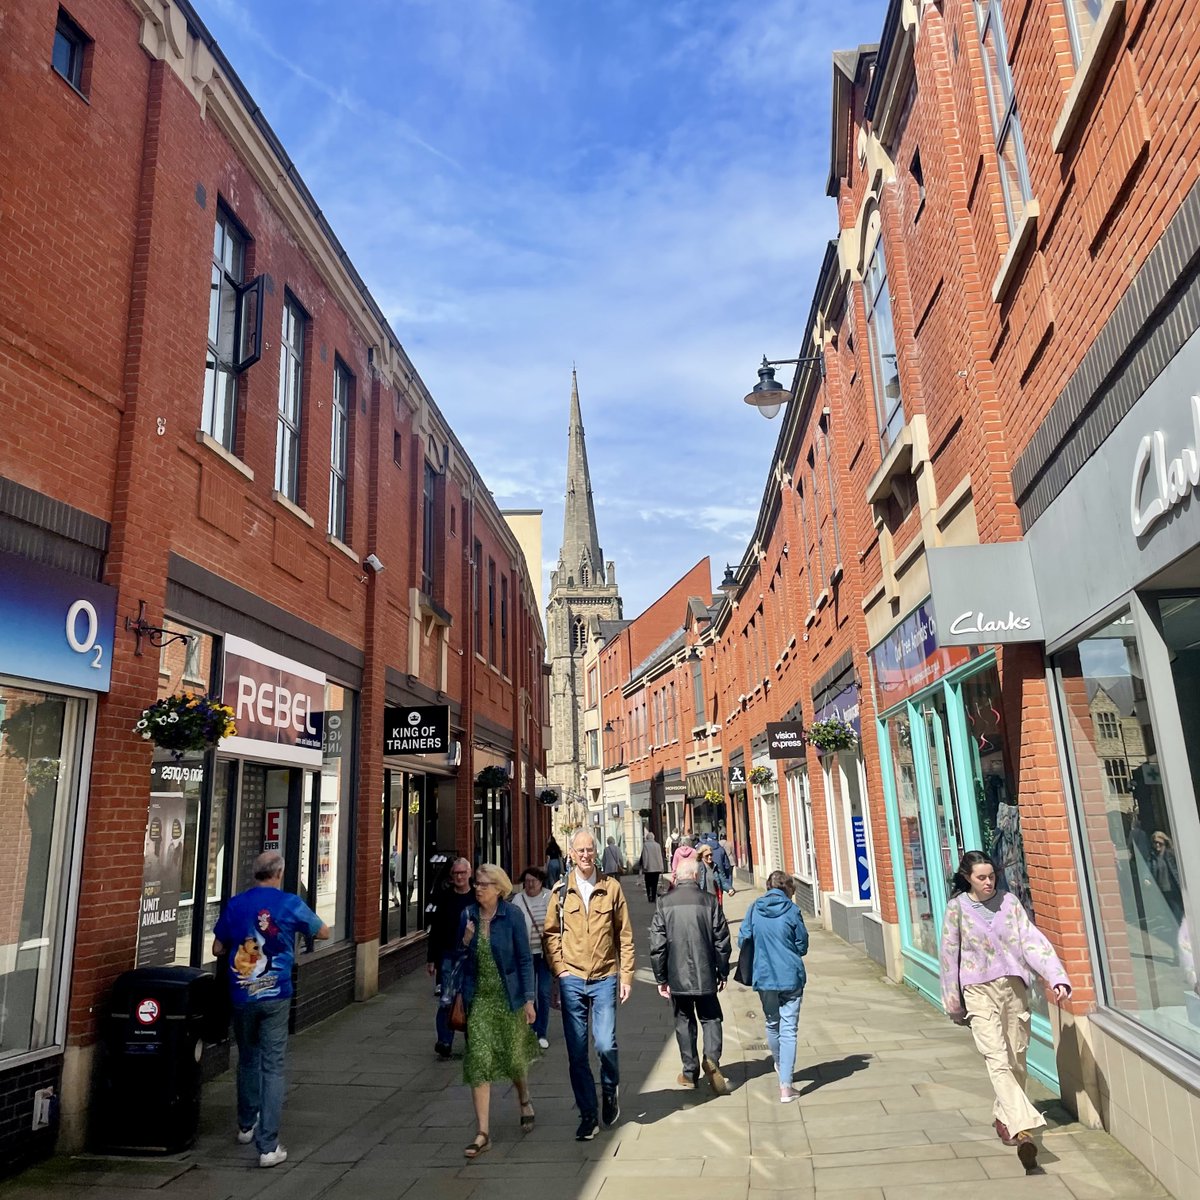 Sun's out! Shopper's out! 🌞 It's lovely to see the sun shining down on @PrinceBishops #PrinceBishopsPlace #ThisIsDurham #DurhamInSpring #LoveDurham #DurhamCity